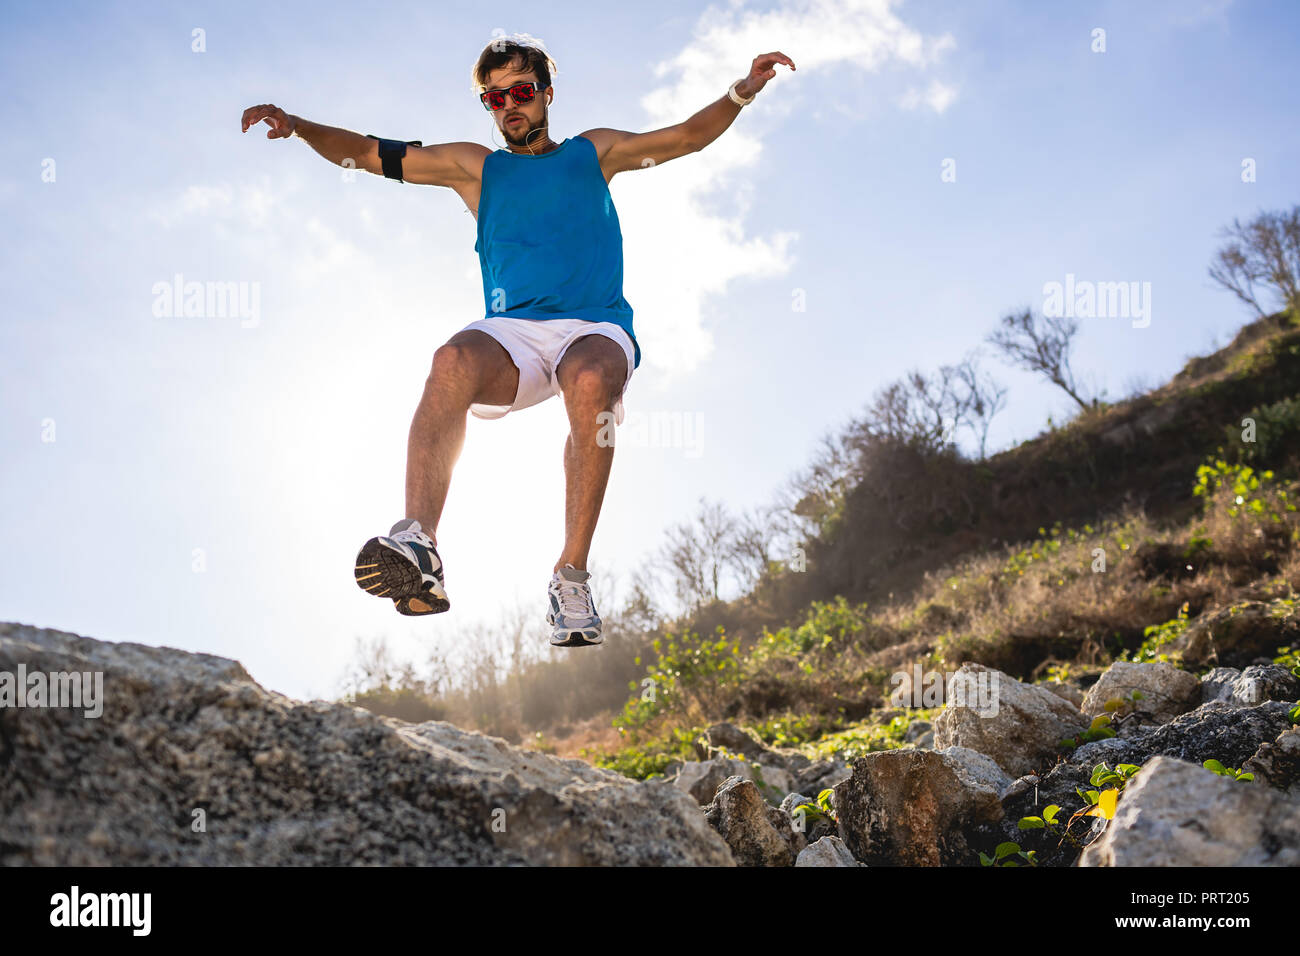 bottom view of athletic man jumping from rocks with sunlight Stock Photo